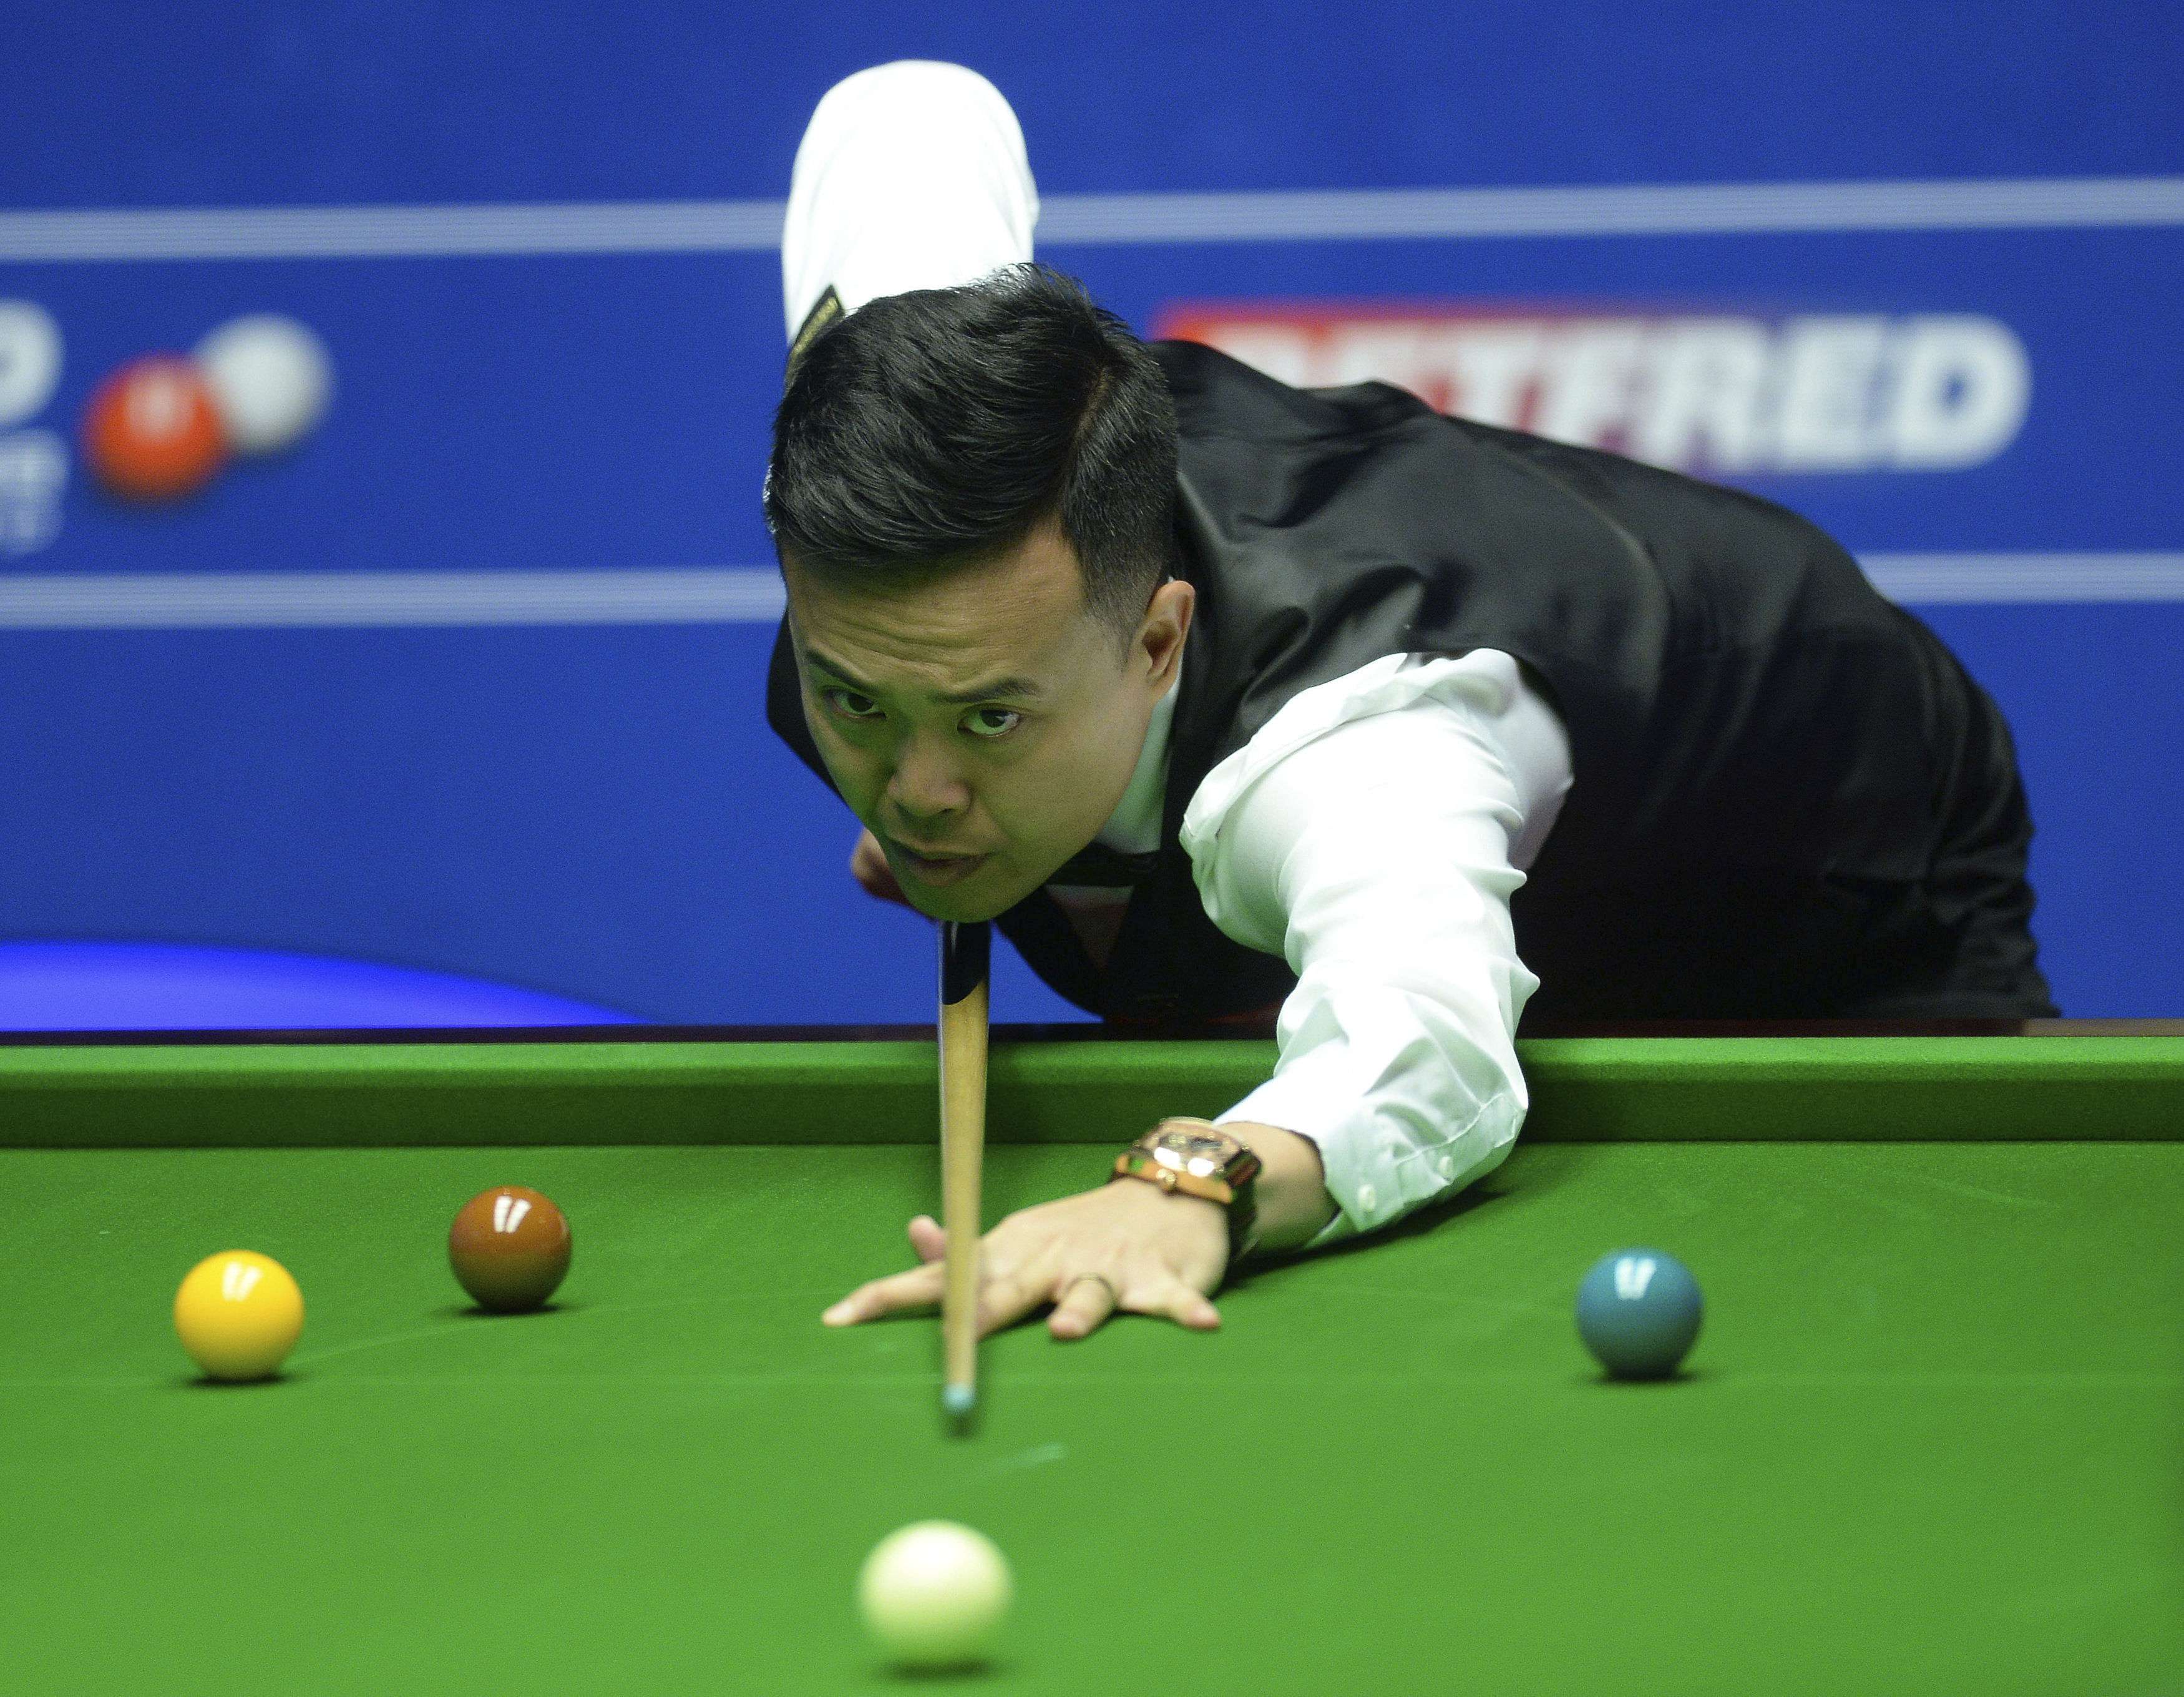 Battling Marco Fu grinds it out to edge Neil Robertson and set up Selby quarter-final at world championship South China Morning Post